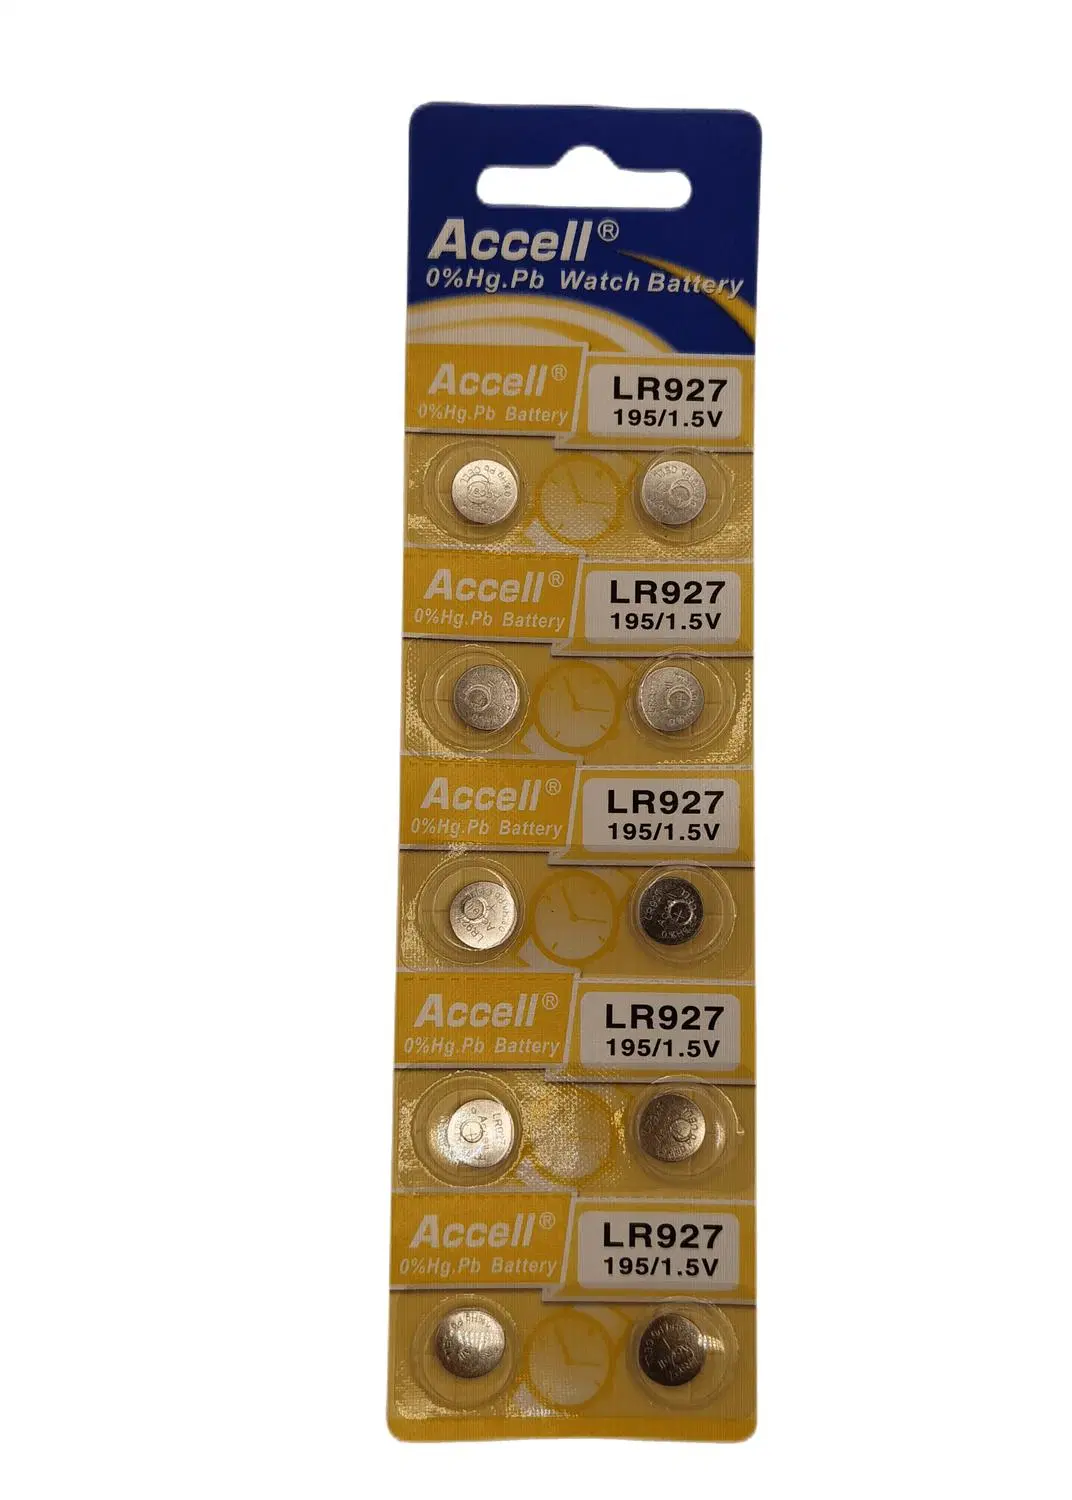 Accell Watch Battery AG7 1.5V Alkaline Button Battery